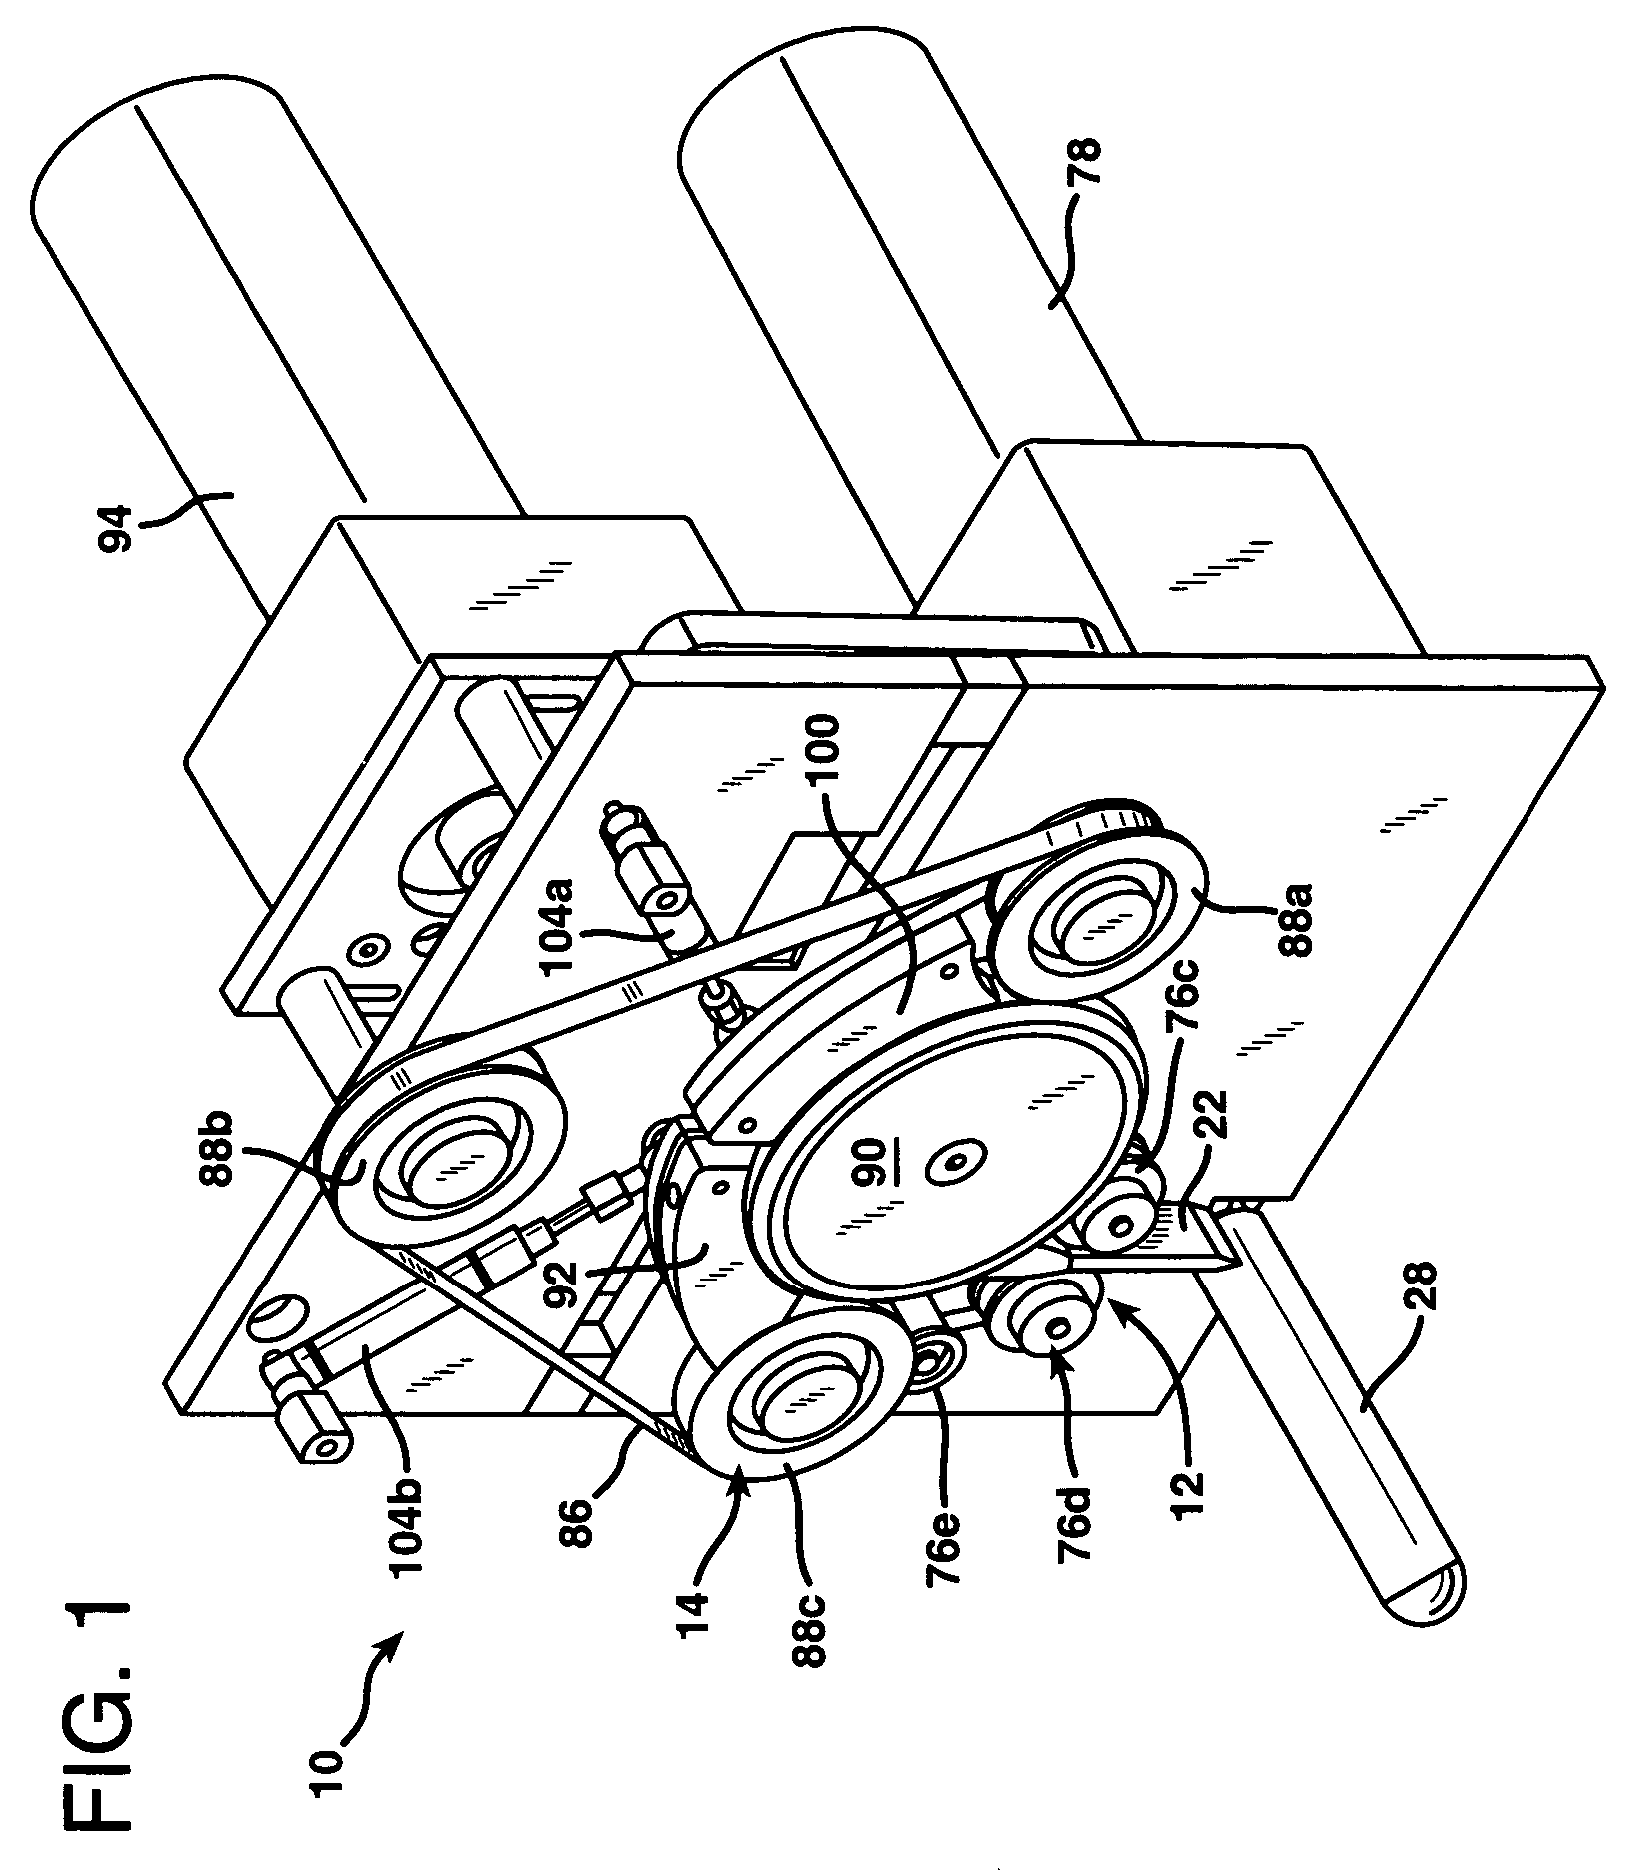 Inflation device for forming inflated containers